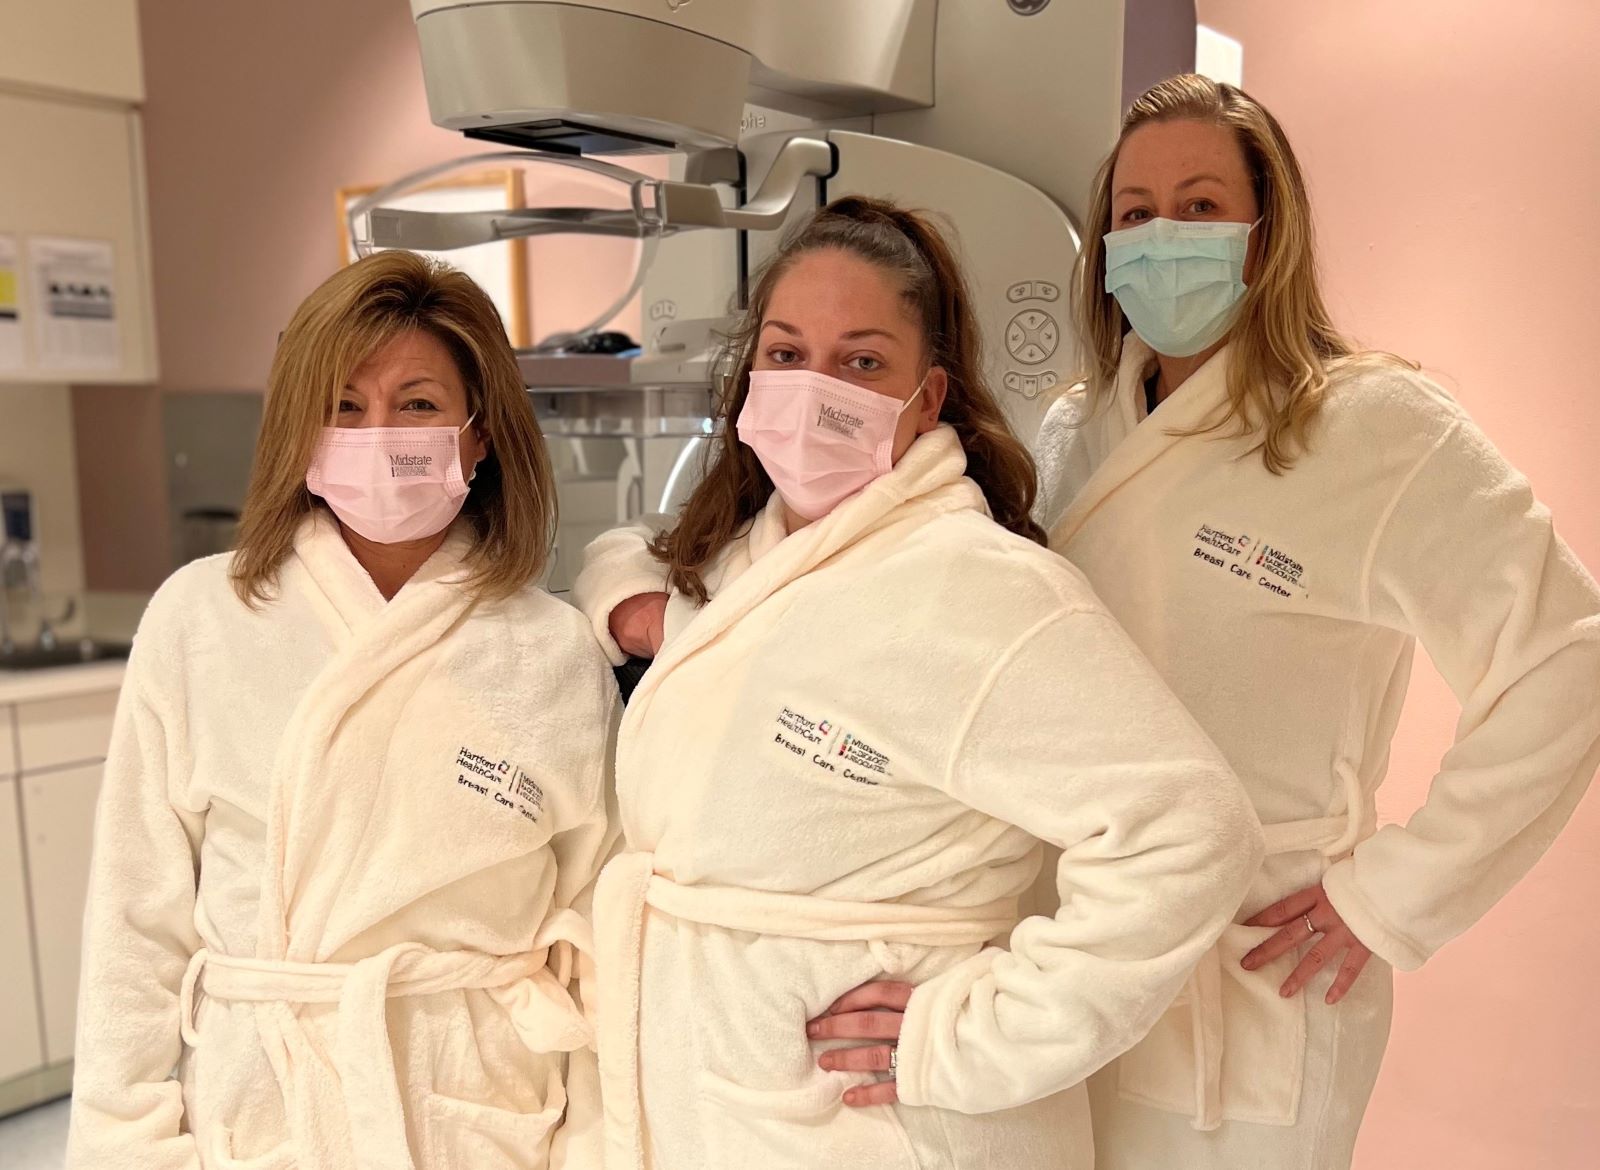 Spa Robes Offer Warmth and Comfort for Breast Imaging Patients